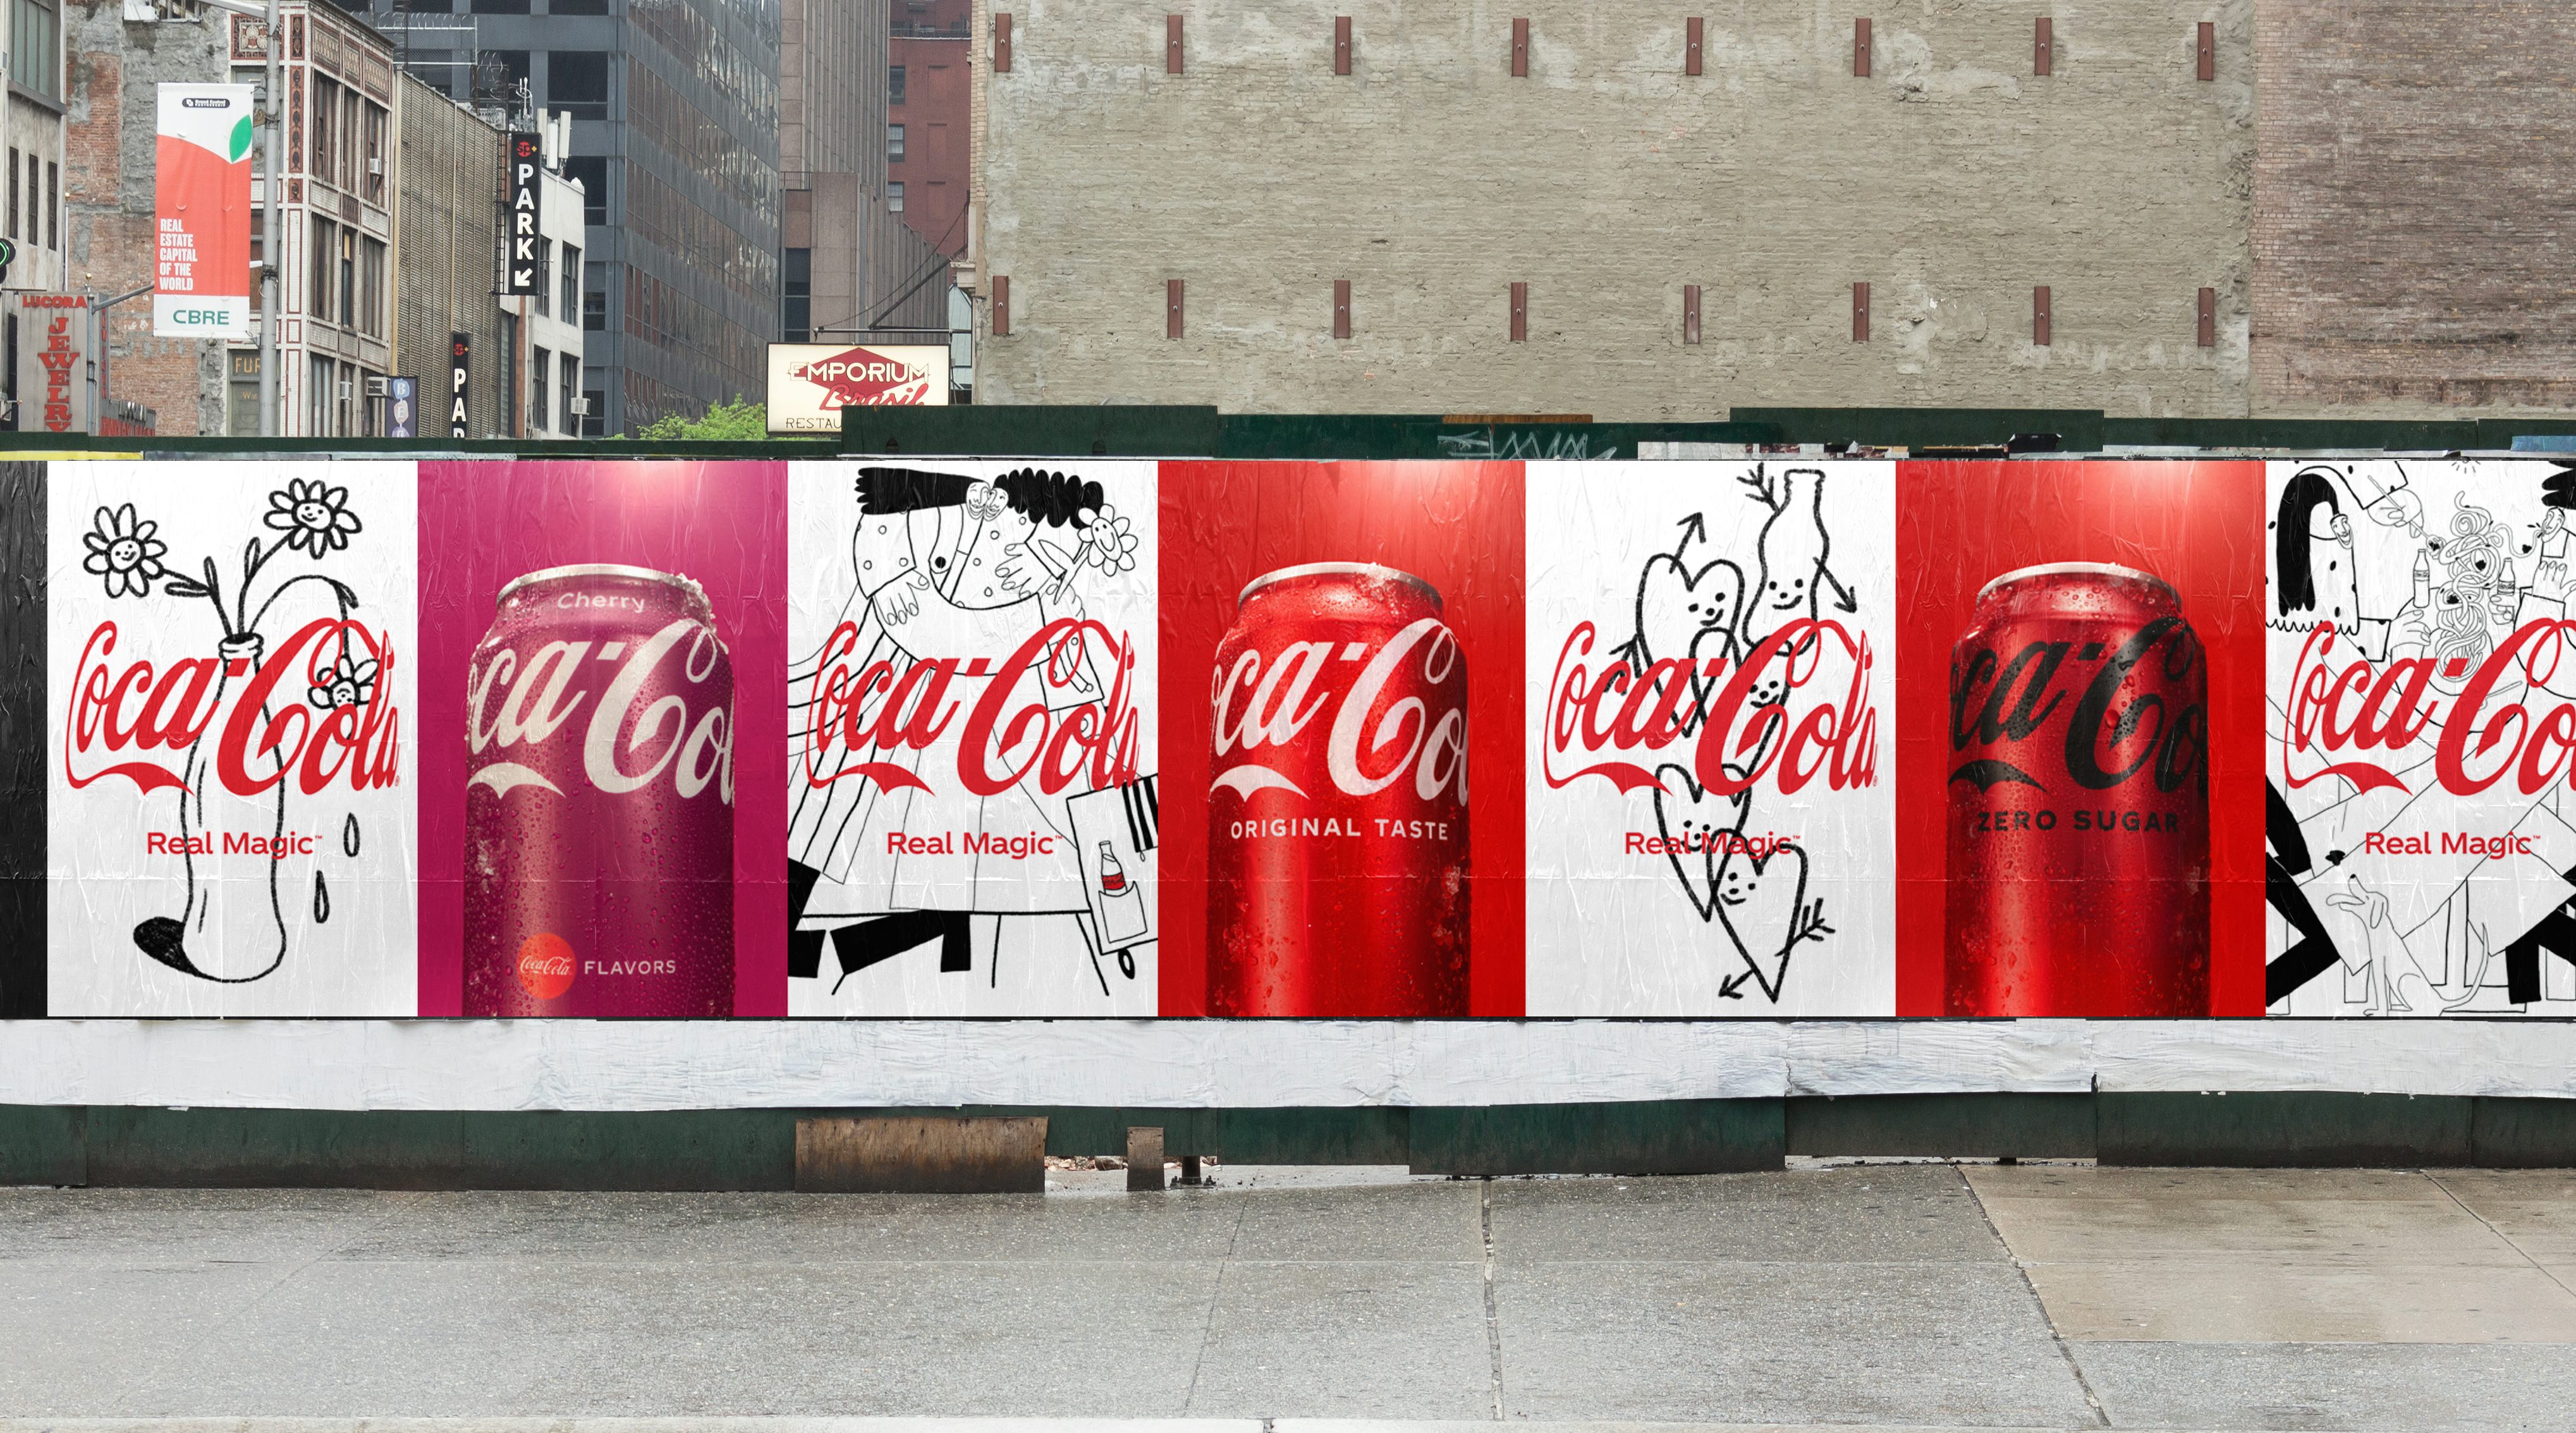 Coca-Cola Aims to Make 'Real Magic' With New Brand Position